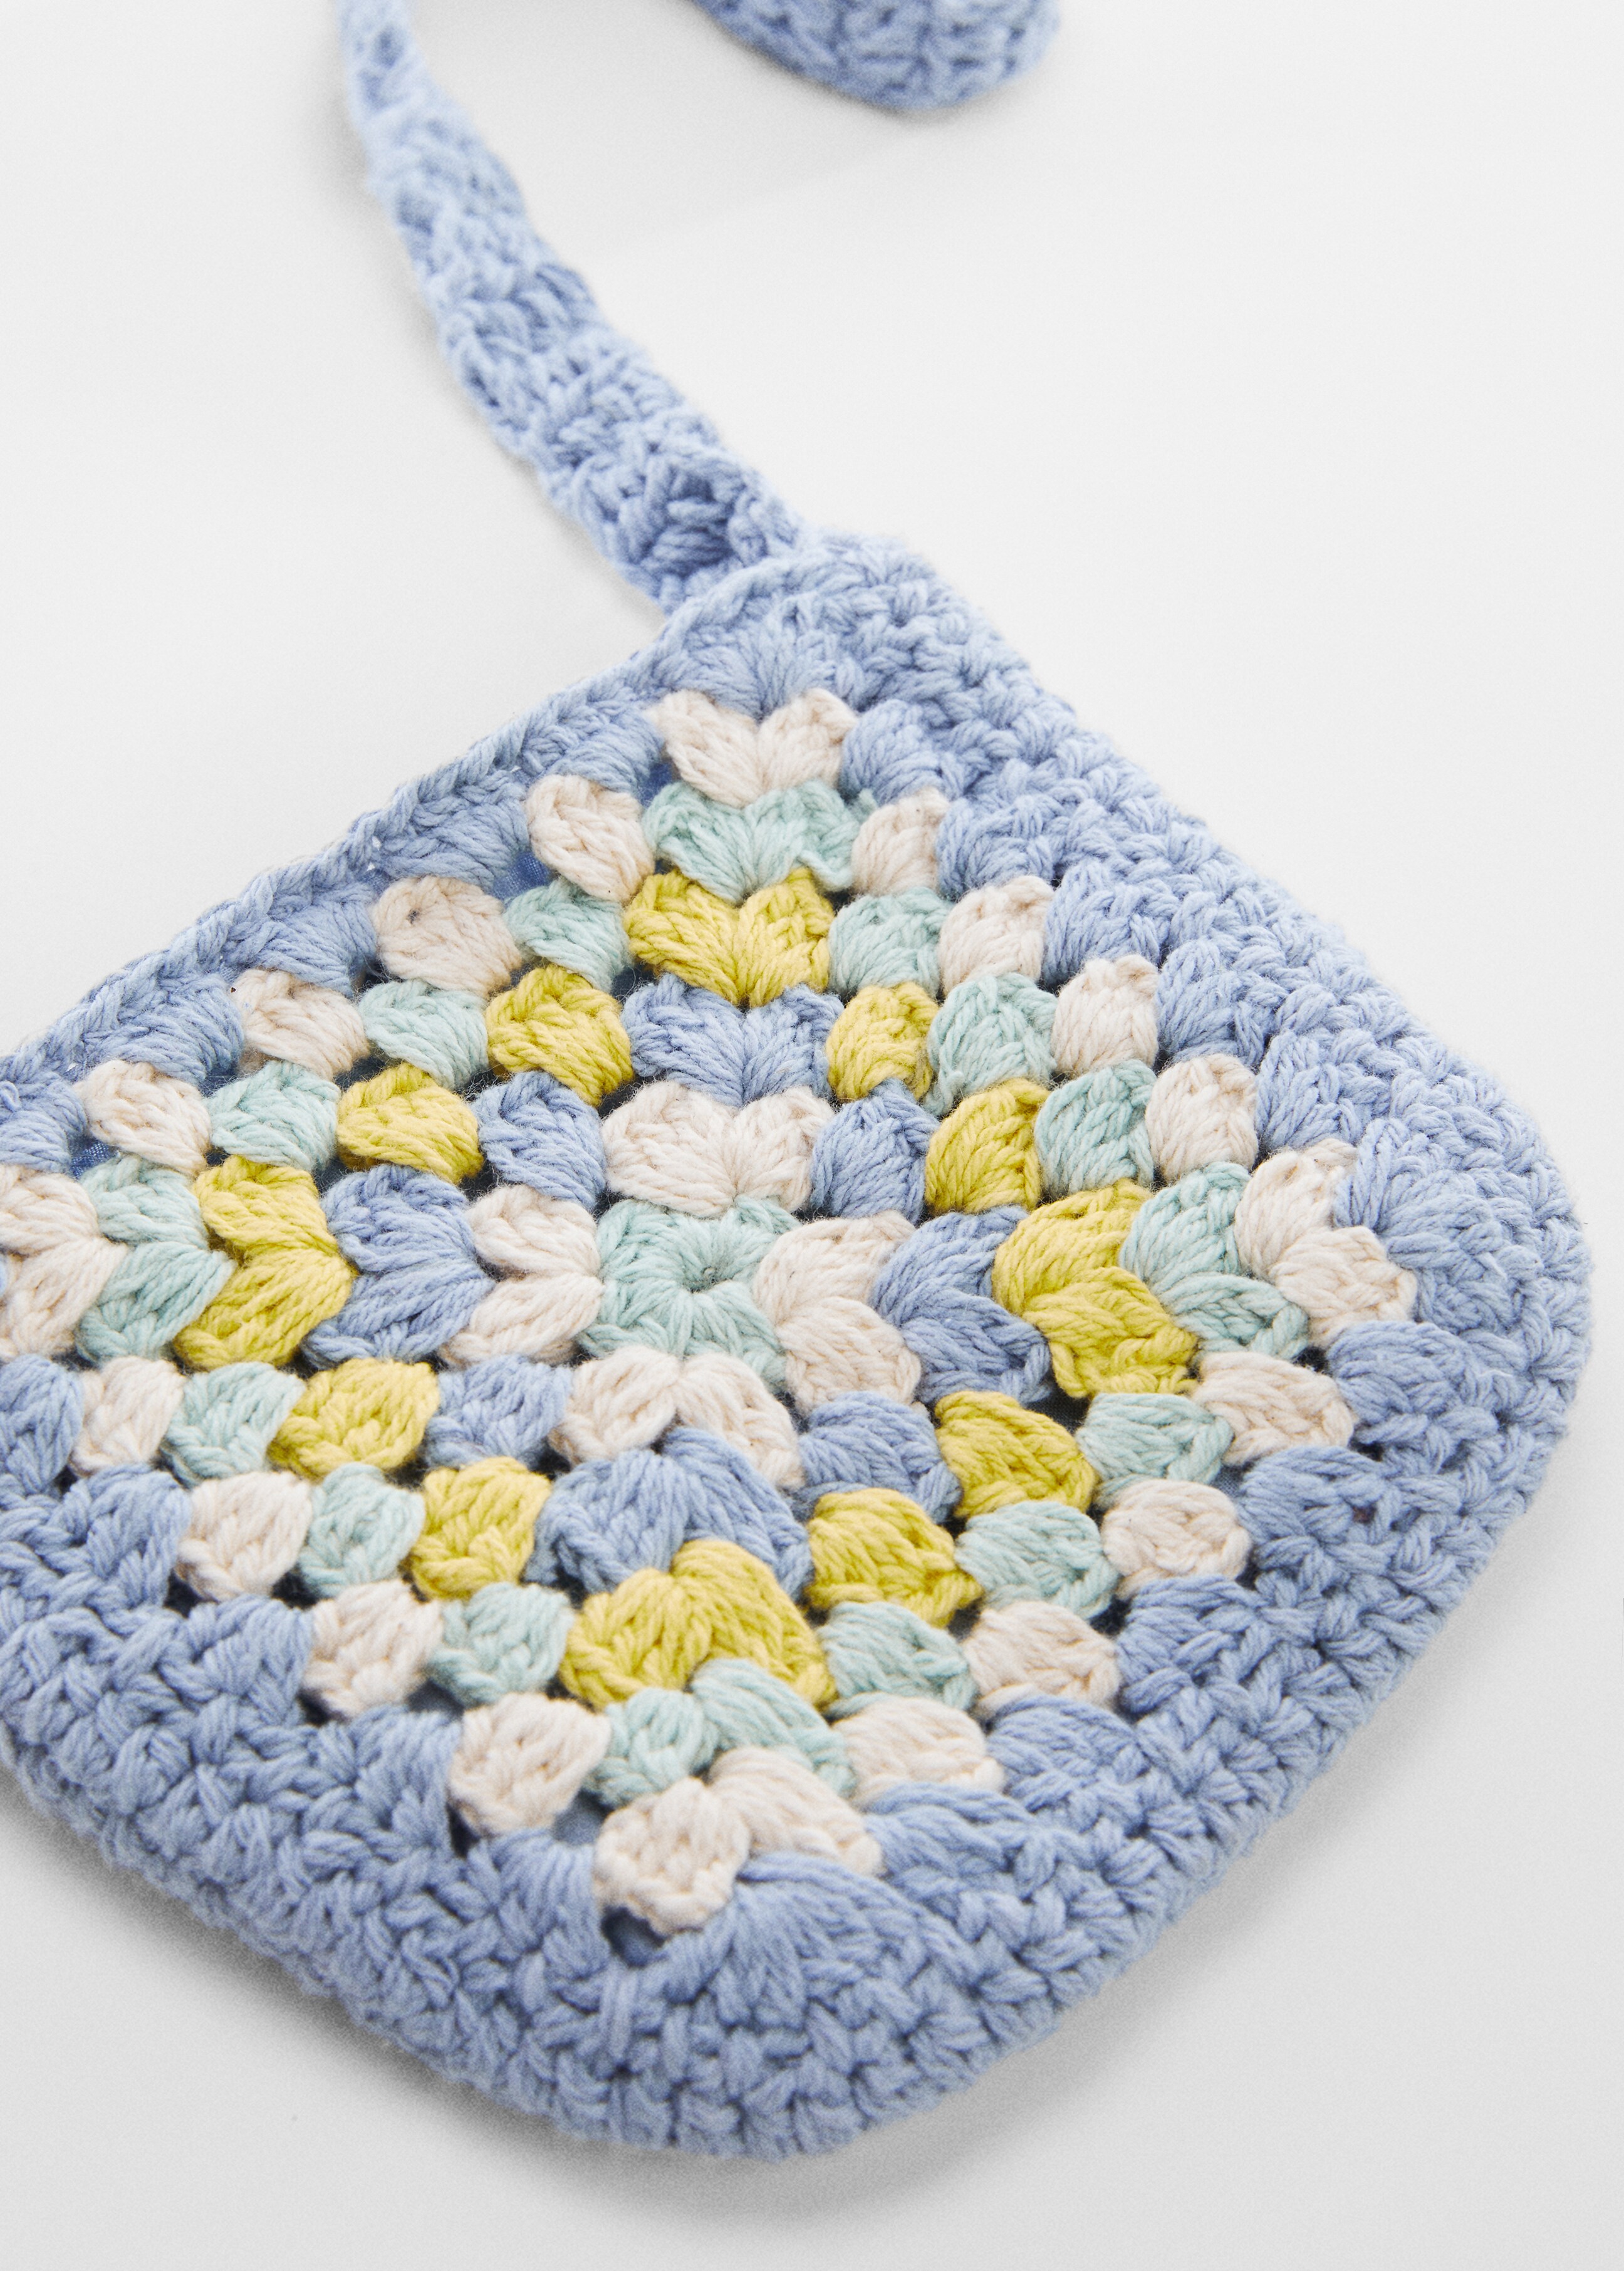 Colourful crochet bag - Details of the article 1